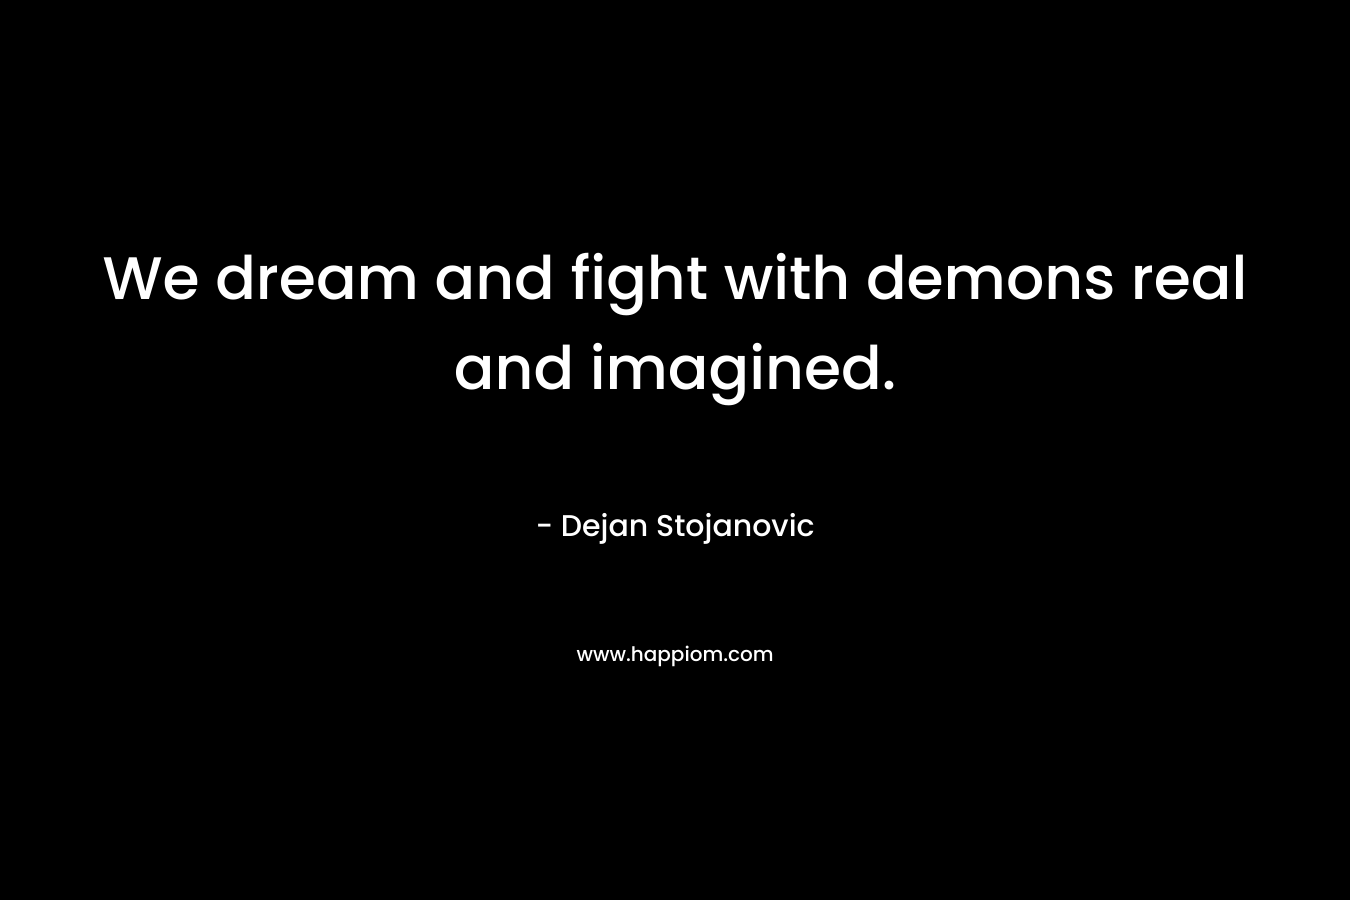 We dream and fight with demons real and imagined.